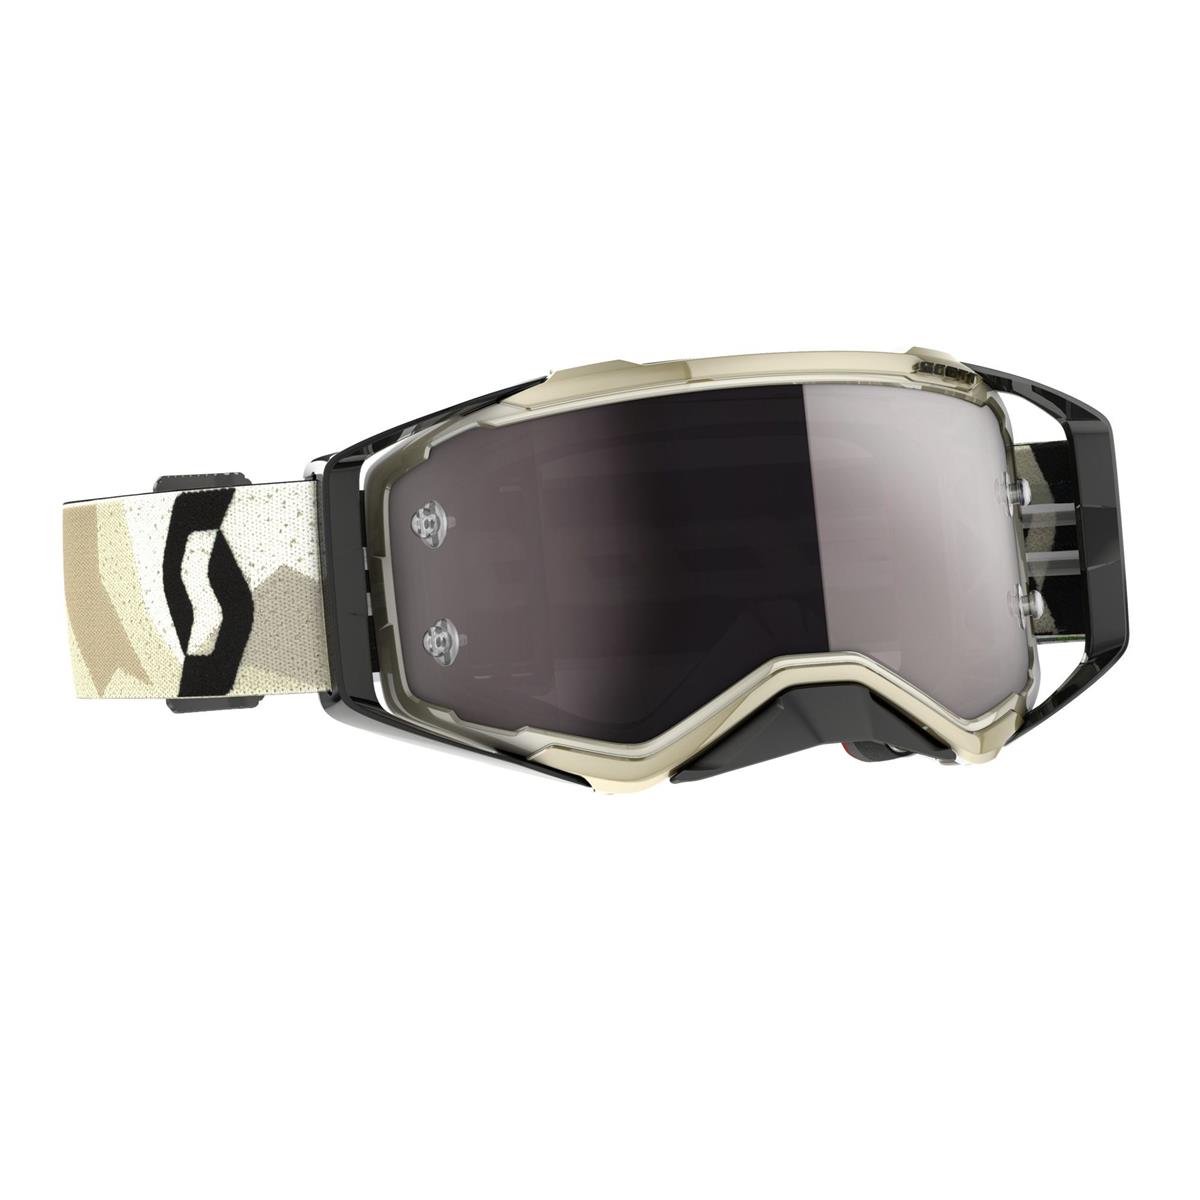 Prospect Mask Camo Beige/Black With Chrome Works Silver Lens